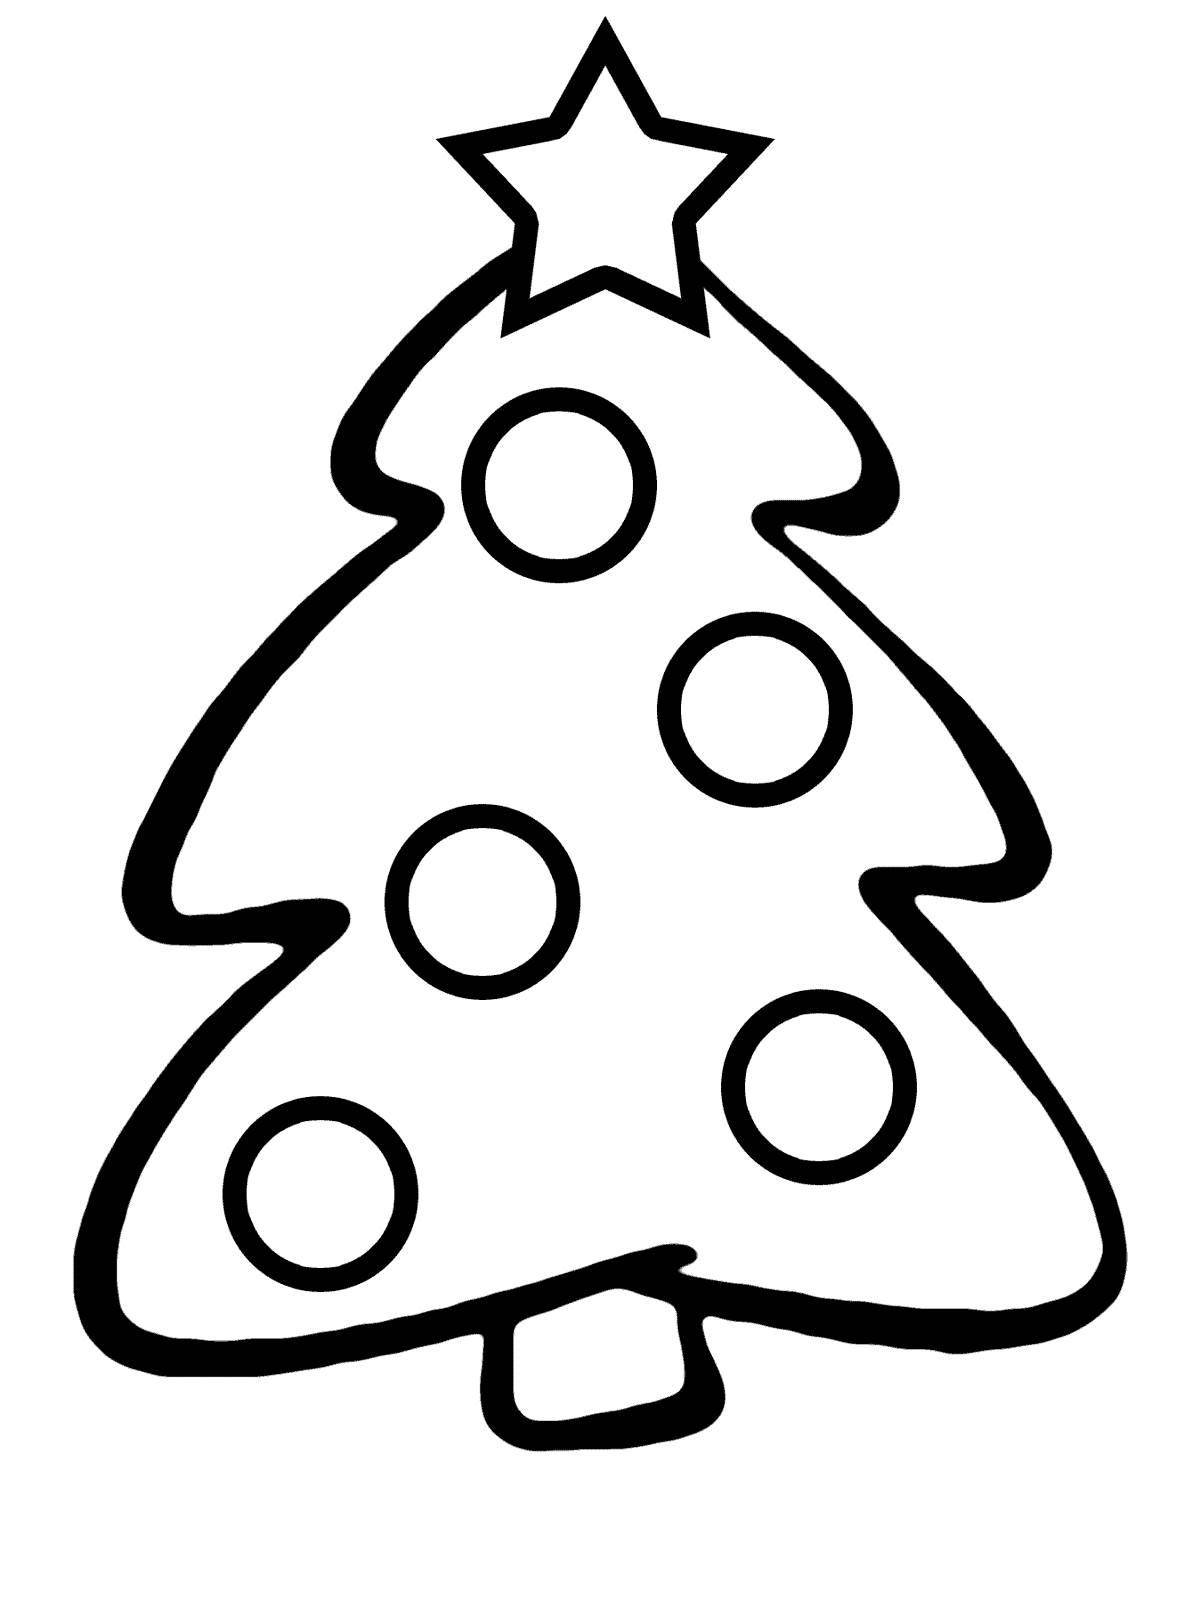 Amazing christmas tree coloring page for kids